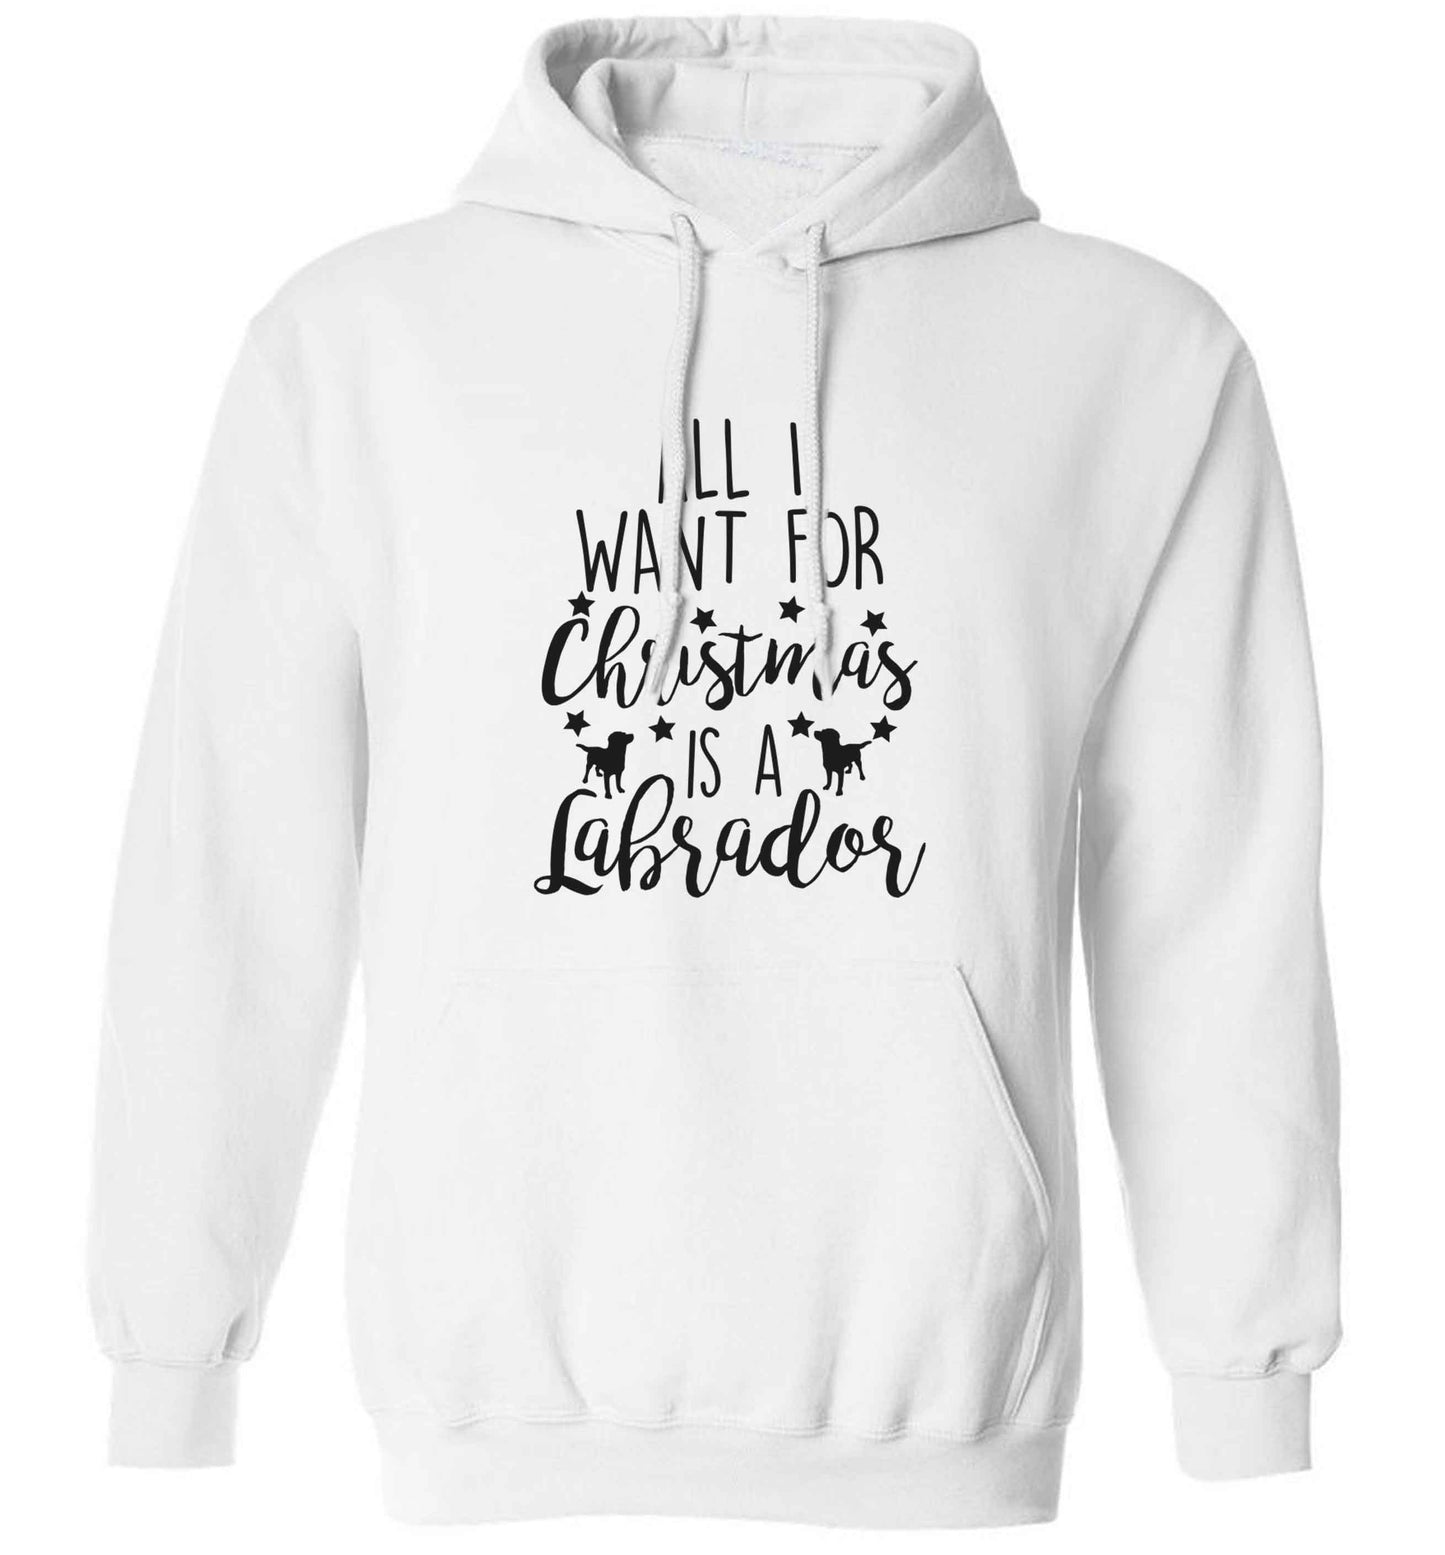 All I want for Christmas is a labrador adults unisex white hoodie 2XL